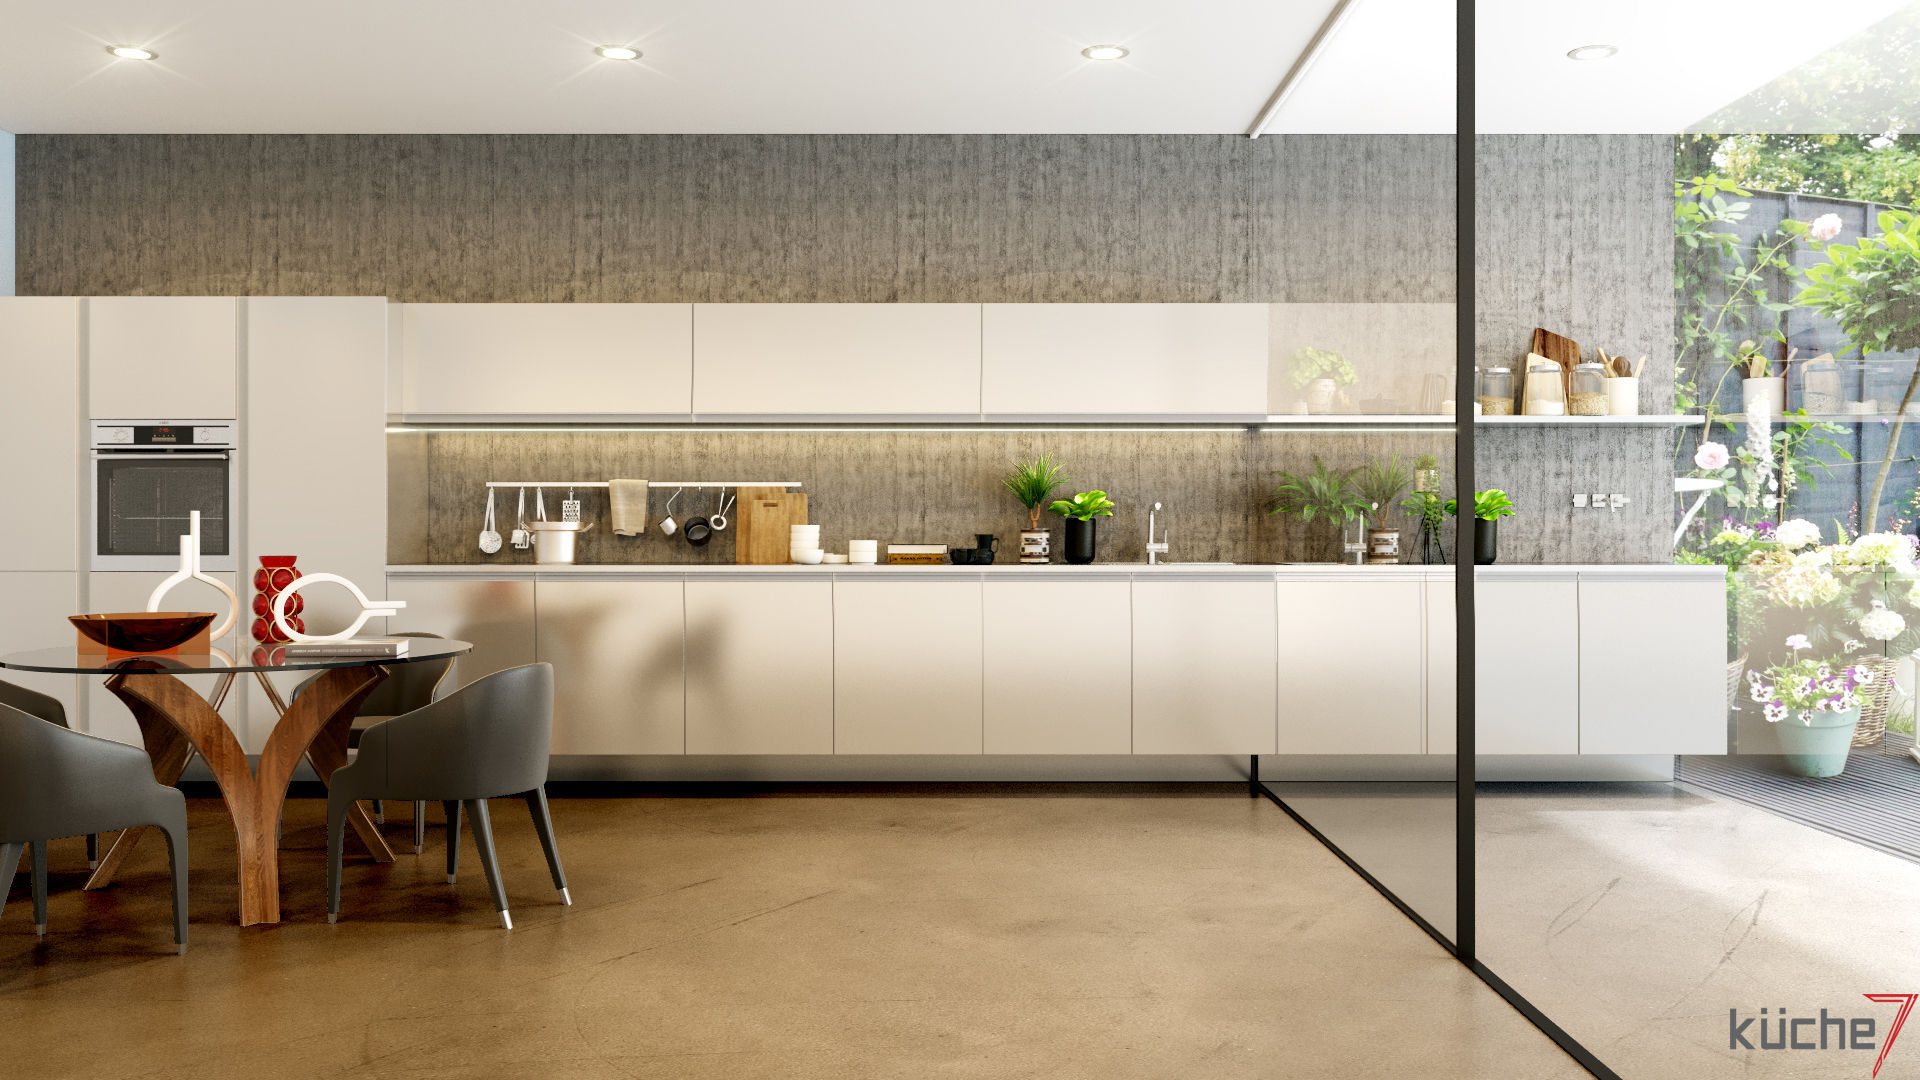 Luxury kitchens that outclasses all other kitchens you've seen, Küche7 Küche7 Cozinhas embutidas